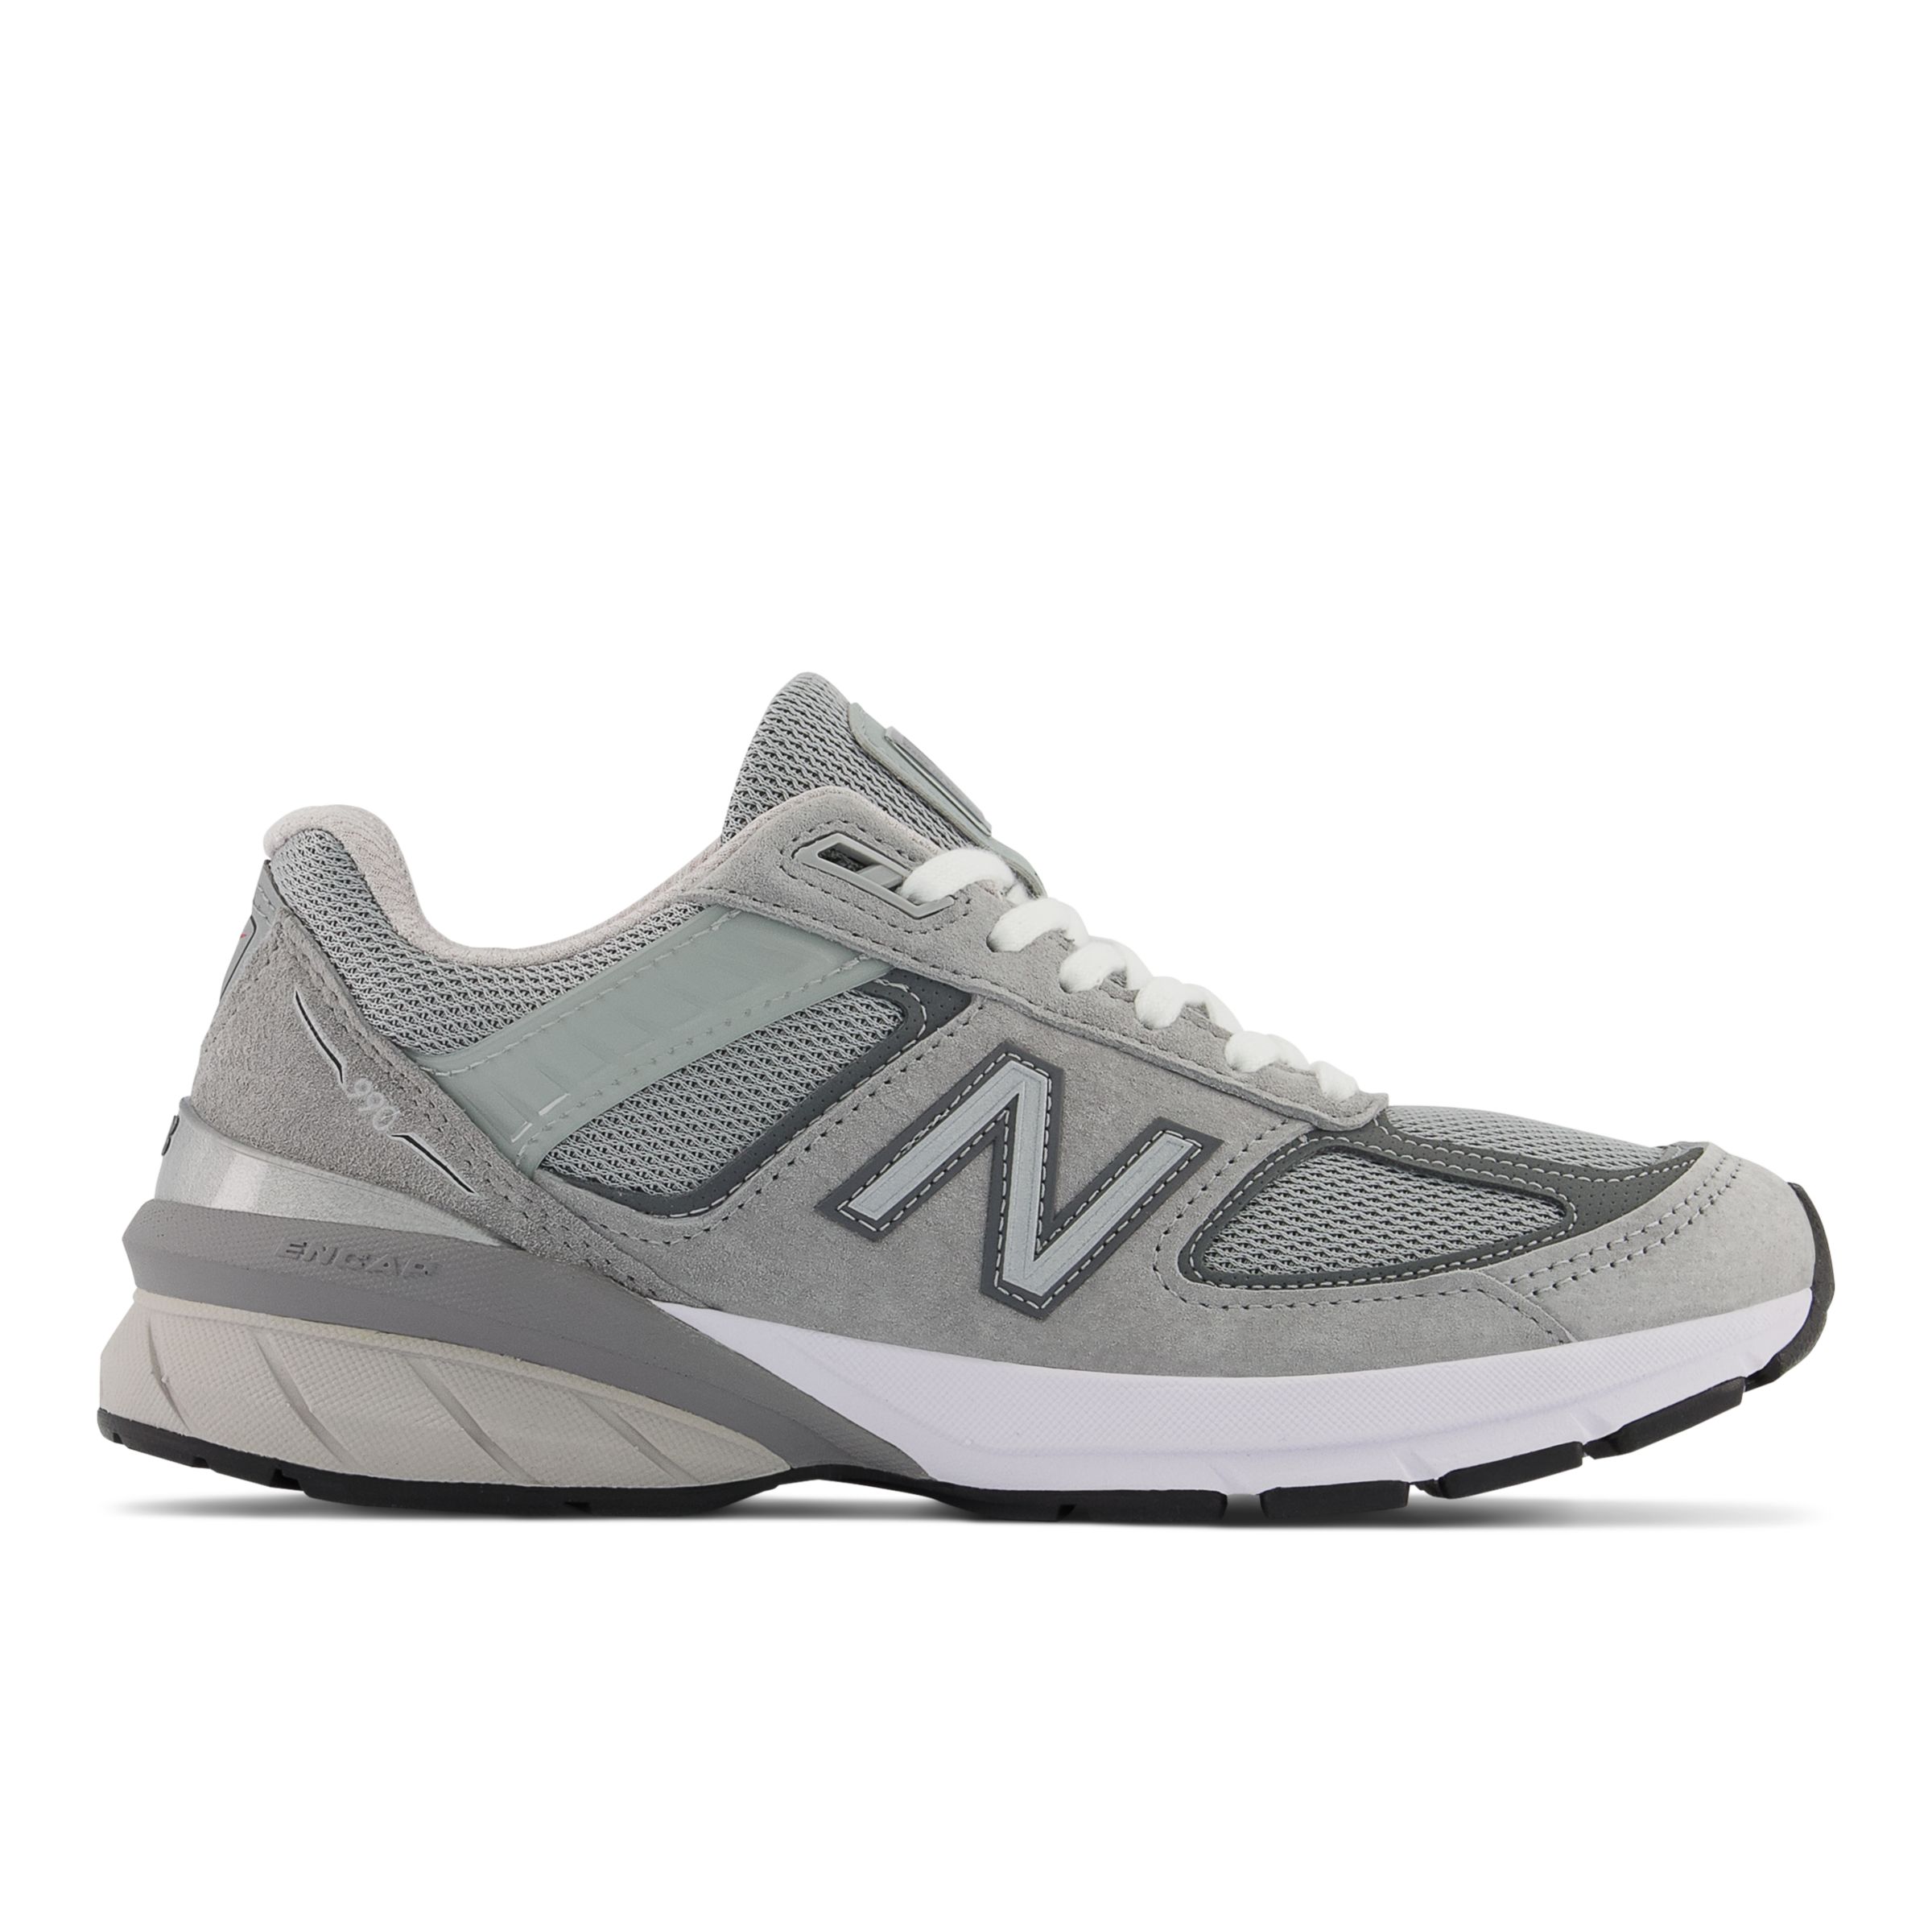 MADE in USA 990v5 Core New Balance